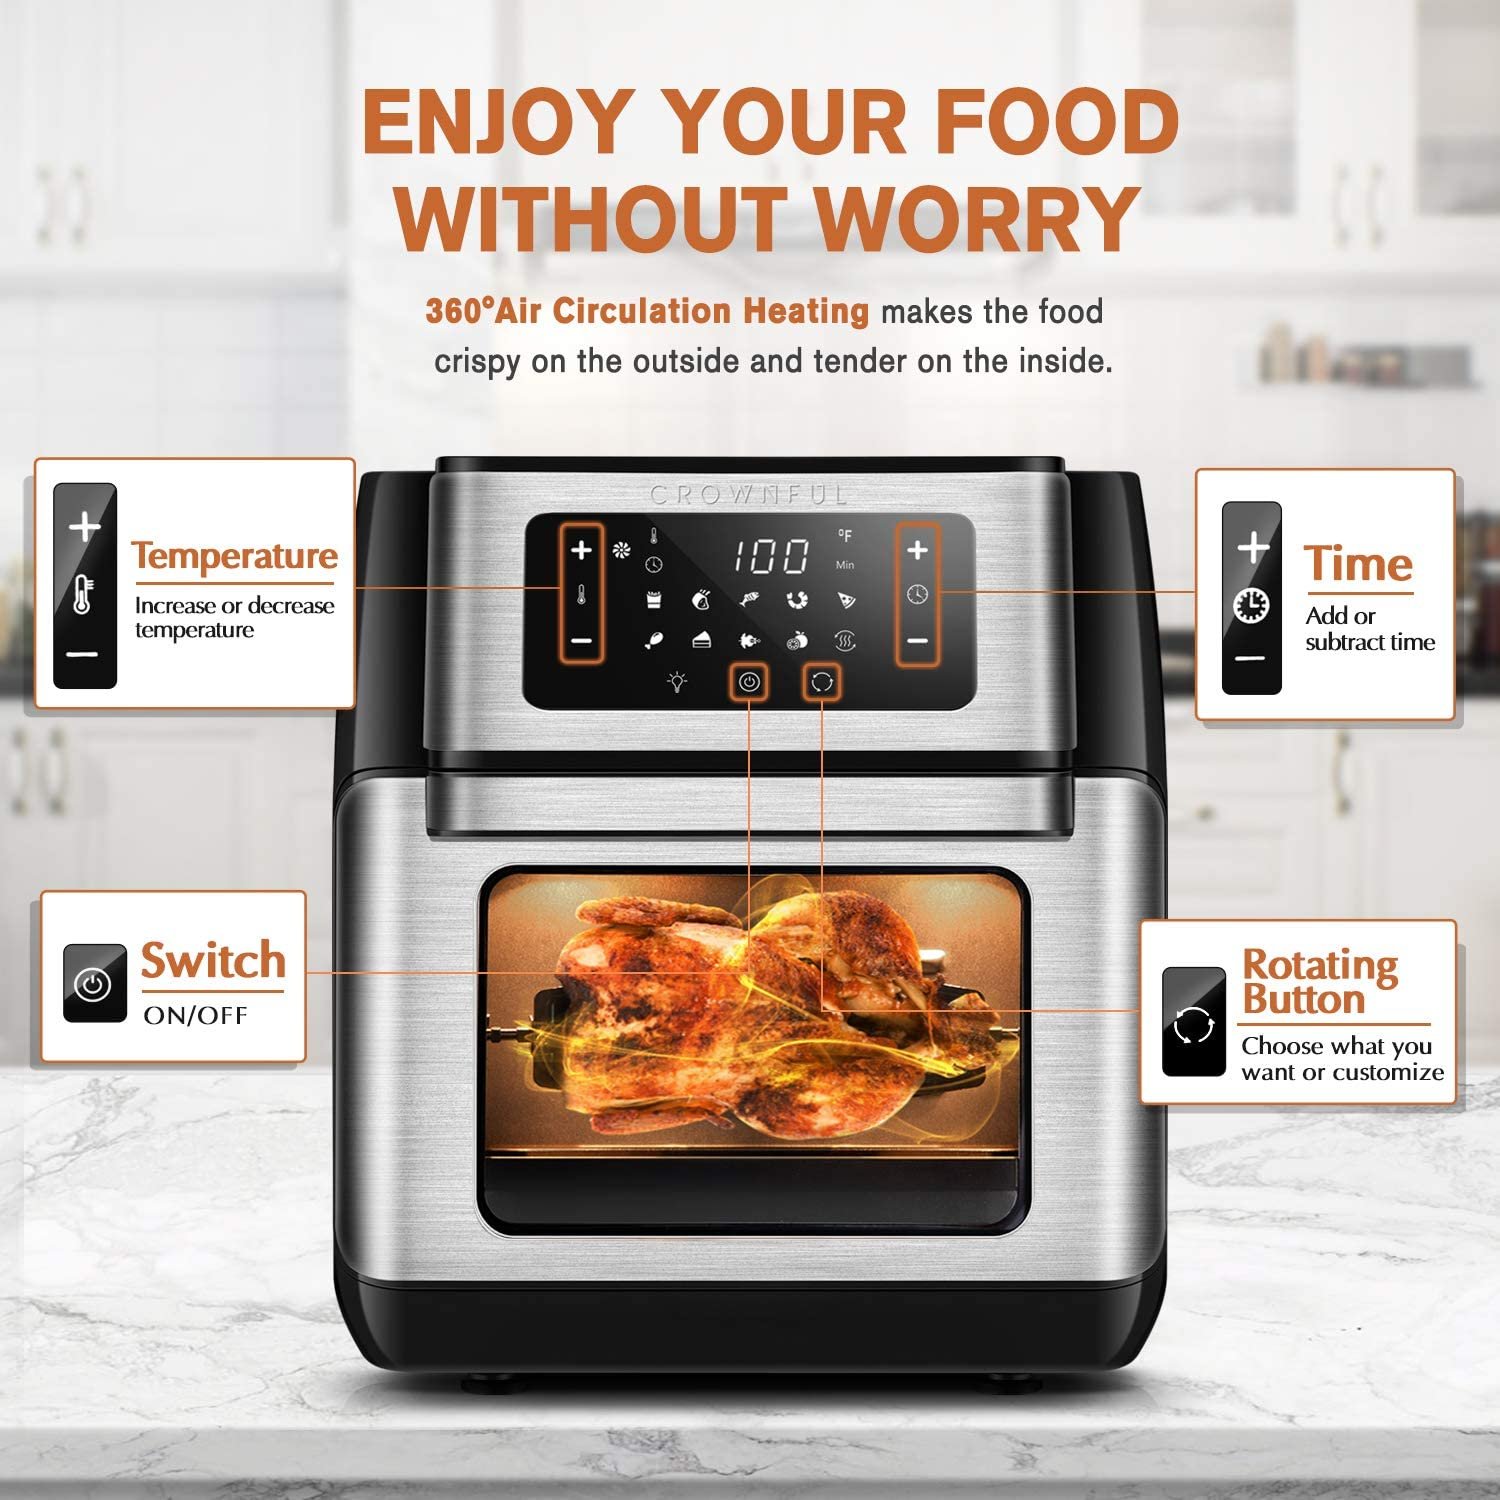 Nekteck: Crownful 32-Qt Air Fryer is on a Limited Deal!